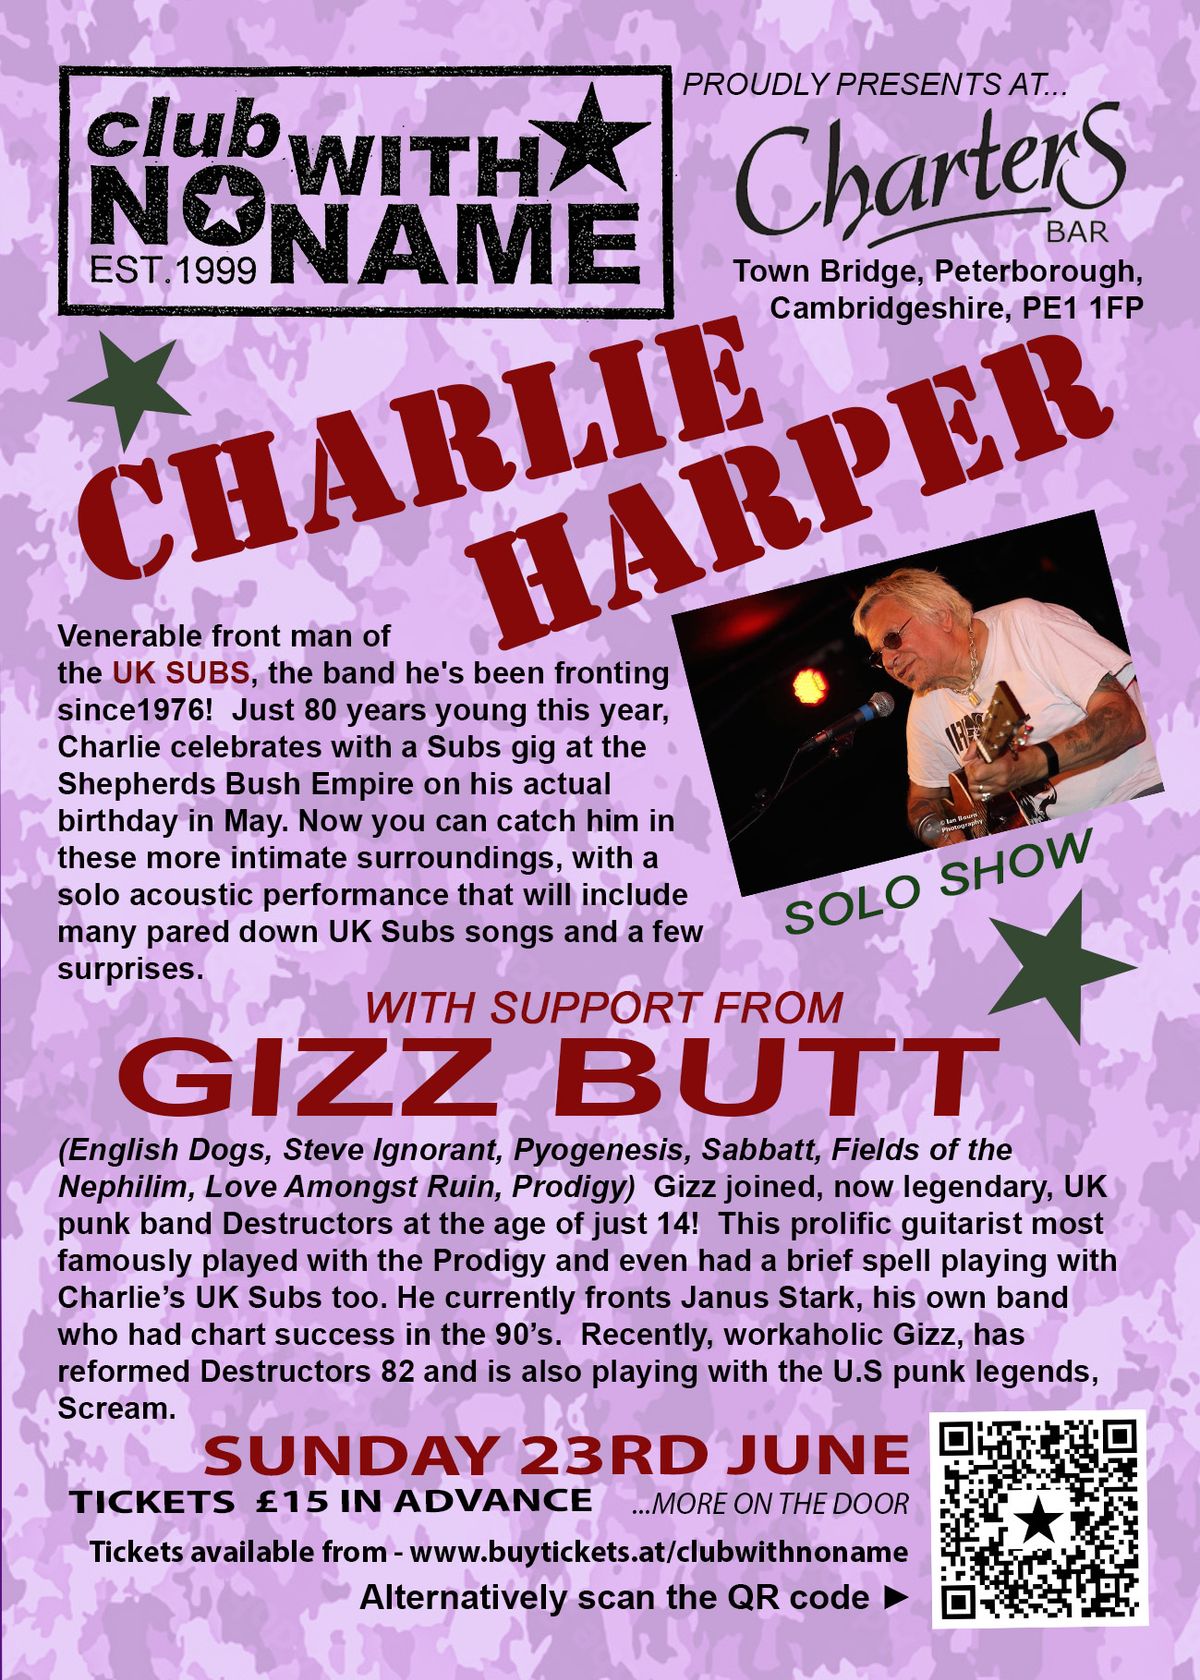 Club with no name presents: CHARLIE HARPER @Charters, Peterborough, PE1 1FP. 